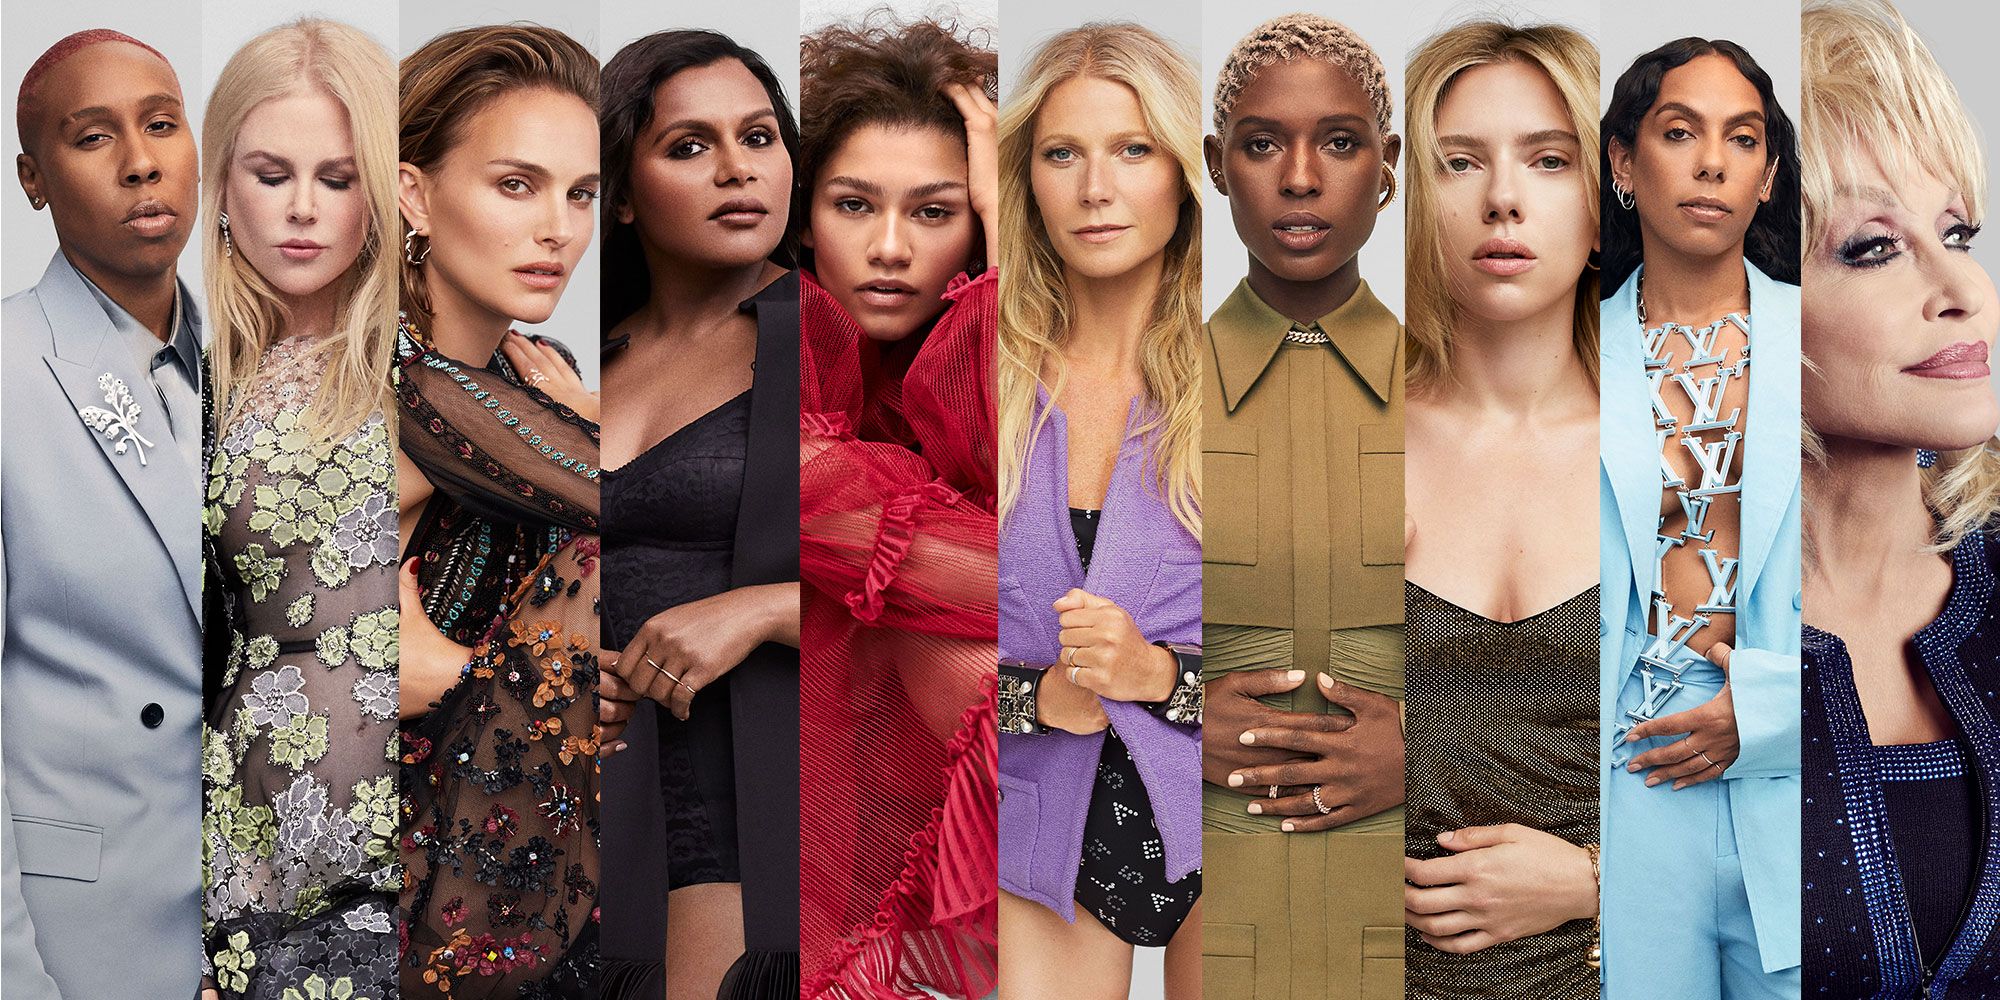 Must Read: 'Elle' Unveils 'Women in Hollywood' Covers, Louis